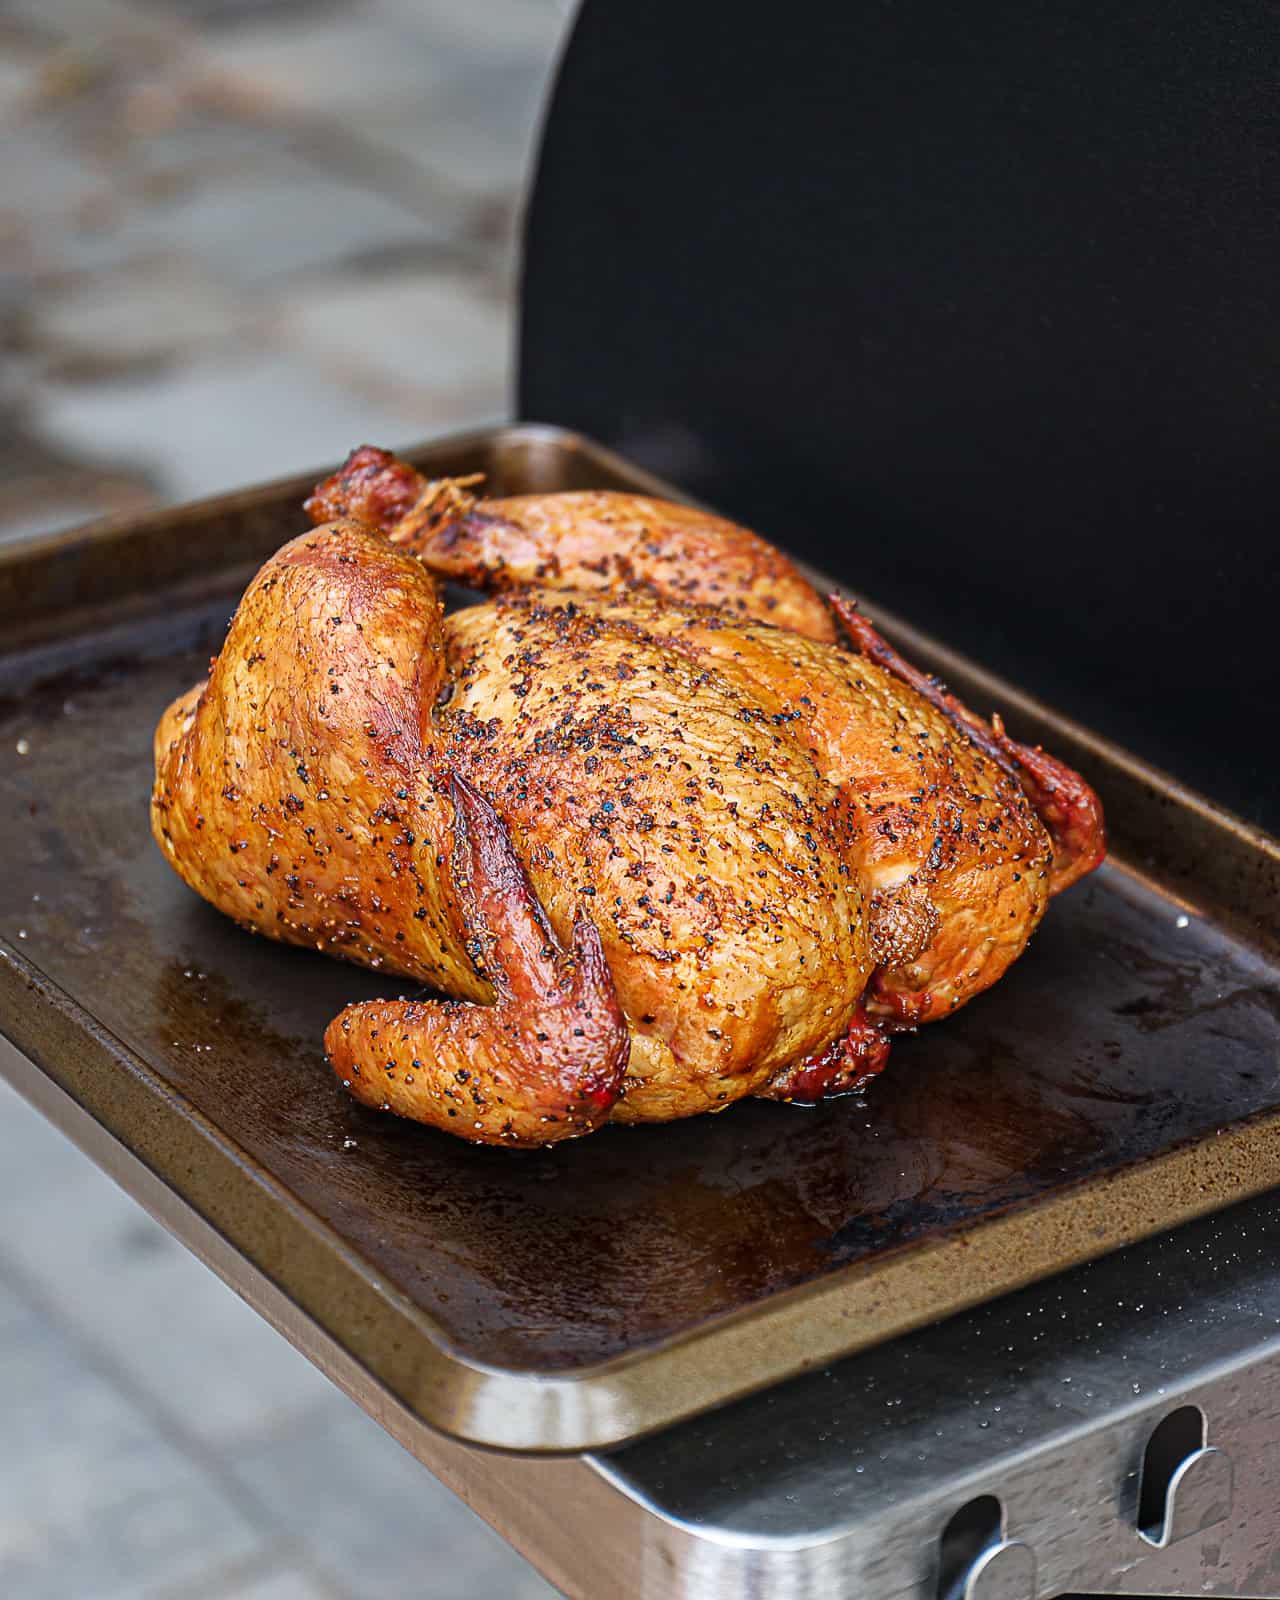 Smoked Whole Chicken BBQ main dish for a crowd